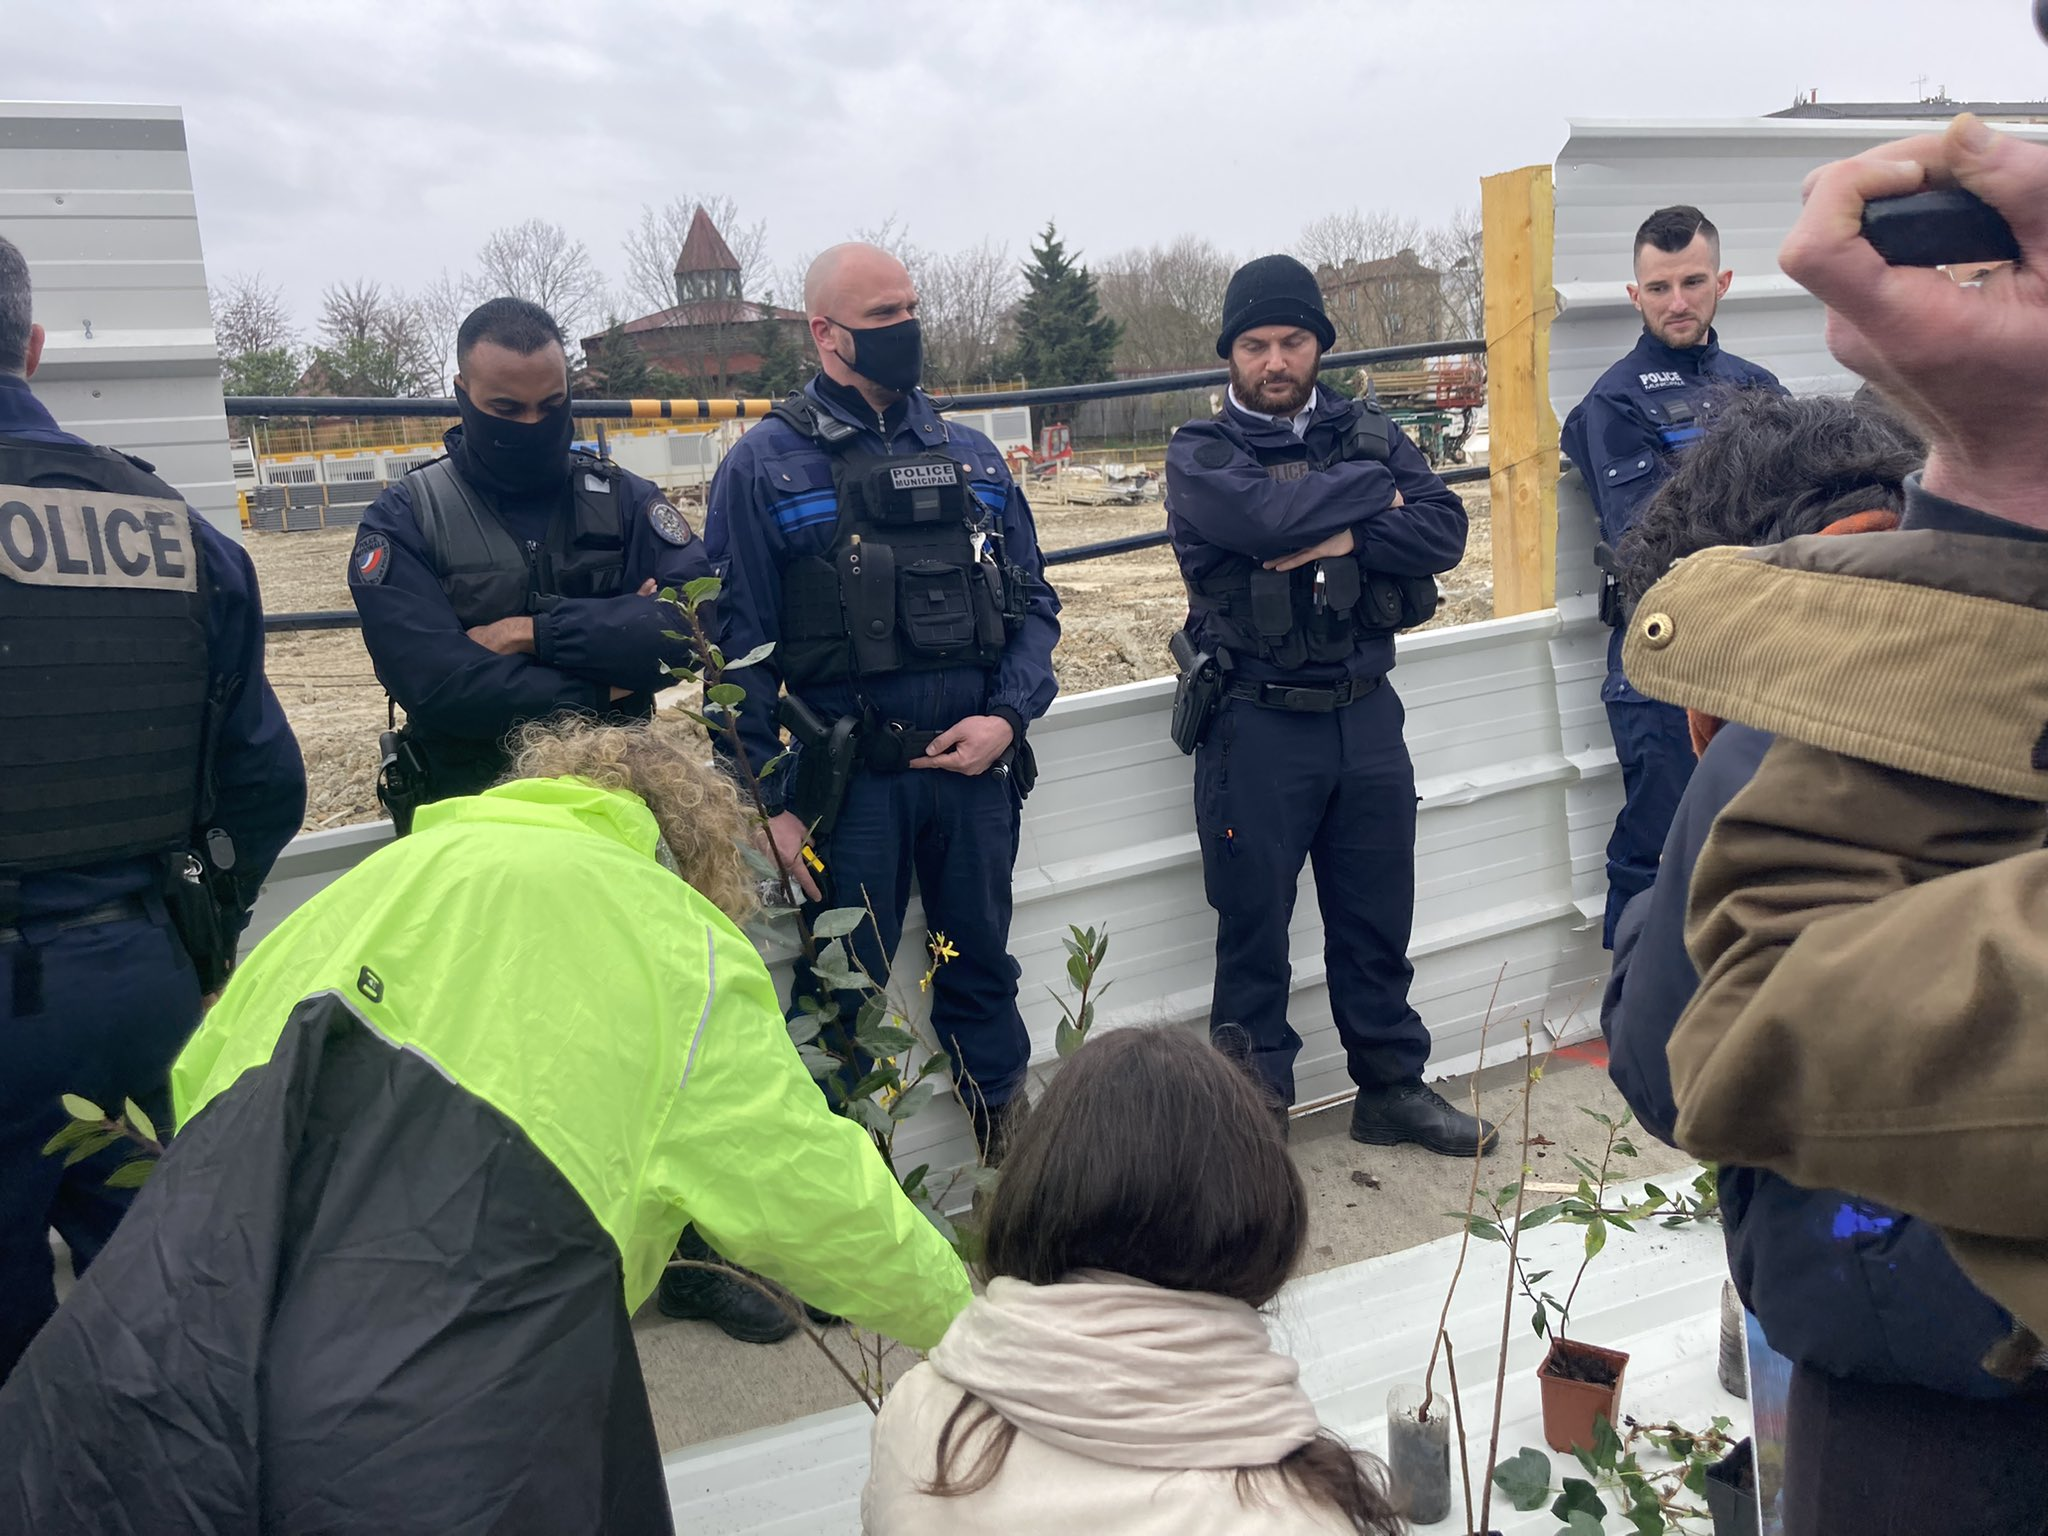 Campaigners have continued to demonstrate against Olympic construction projects at Aubervilliers ©Twitter/JAD - Jardins à défendre d'Aubervilliers